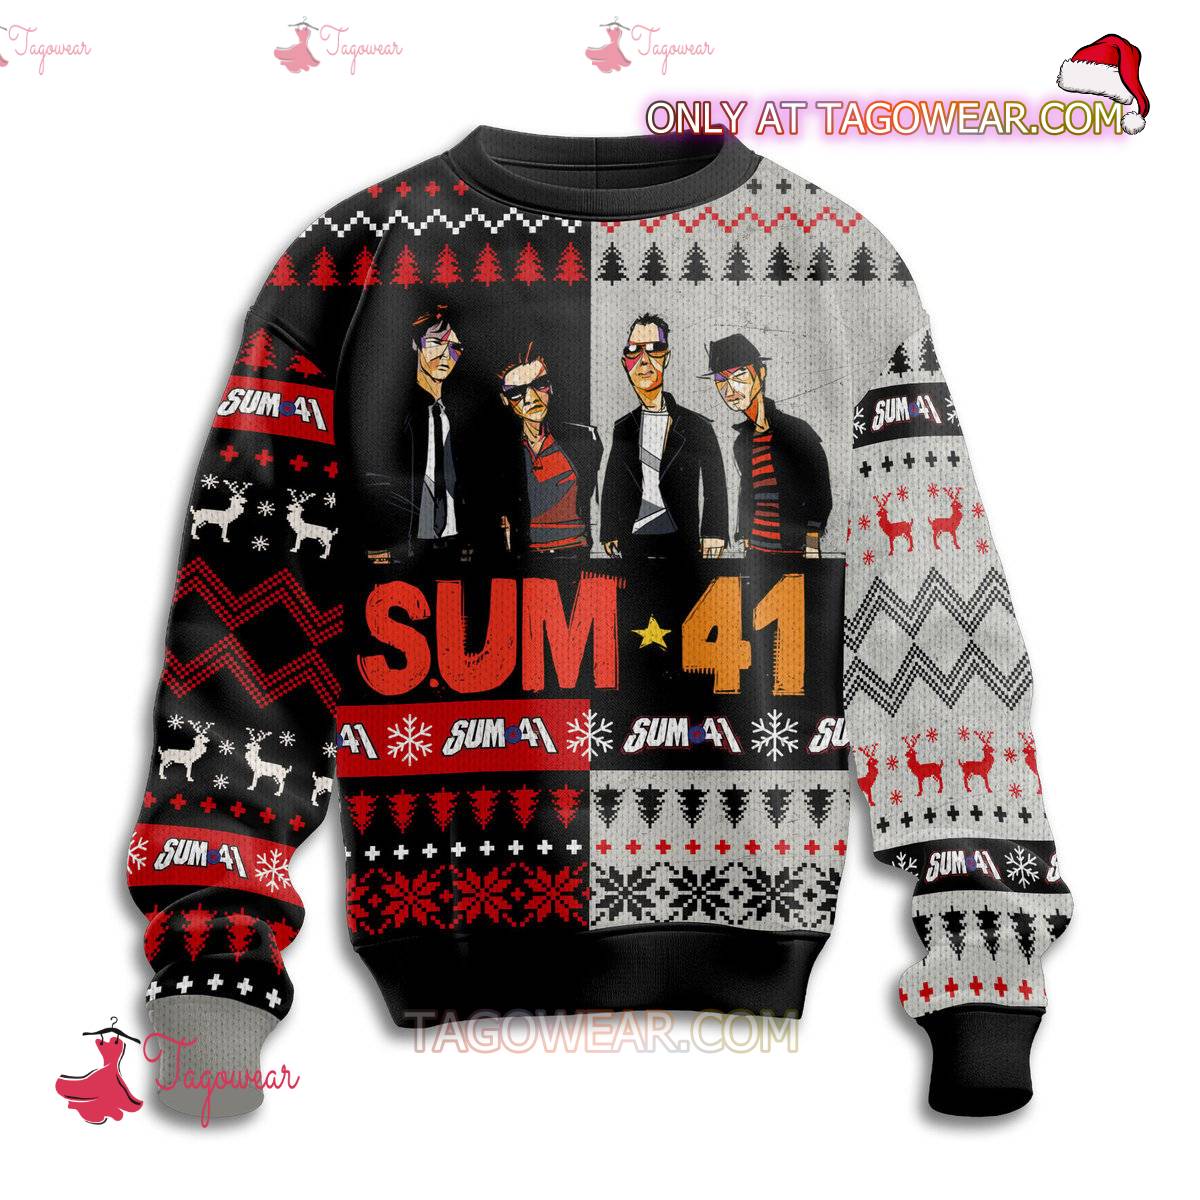 Sum 41 Heaven Hell Ugly Christmas Sweater a